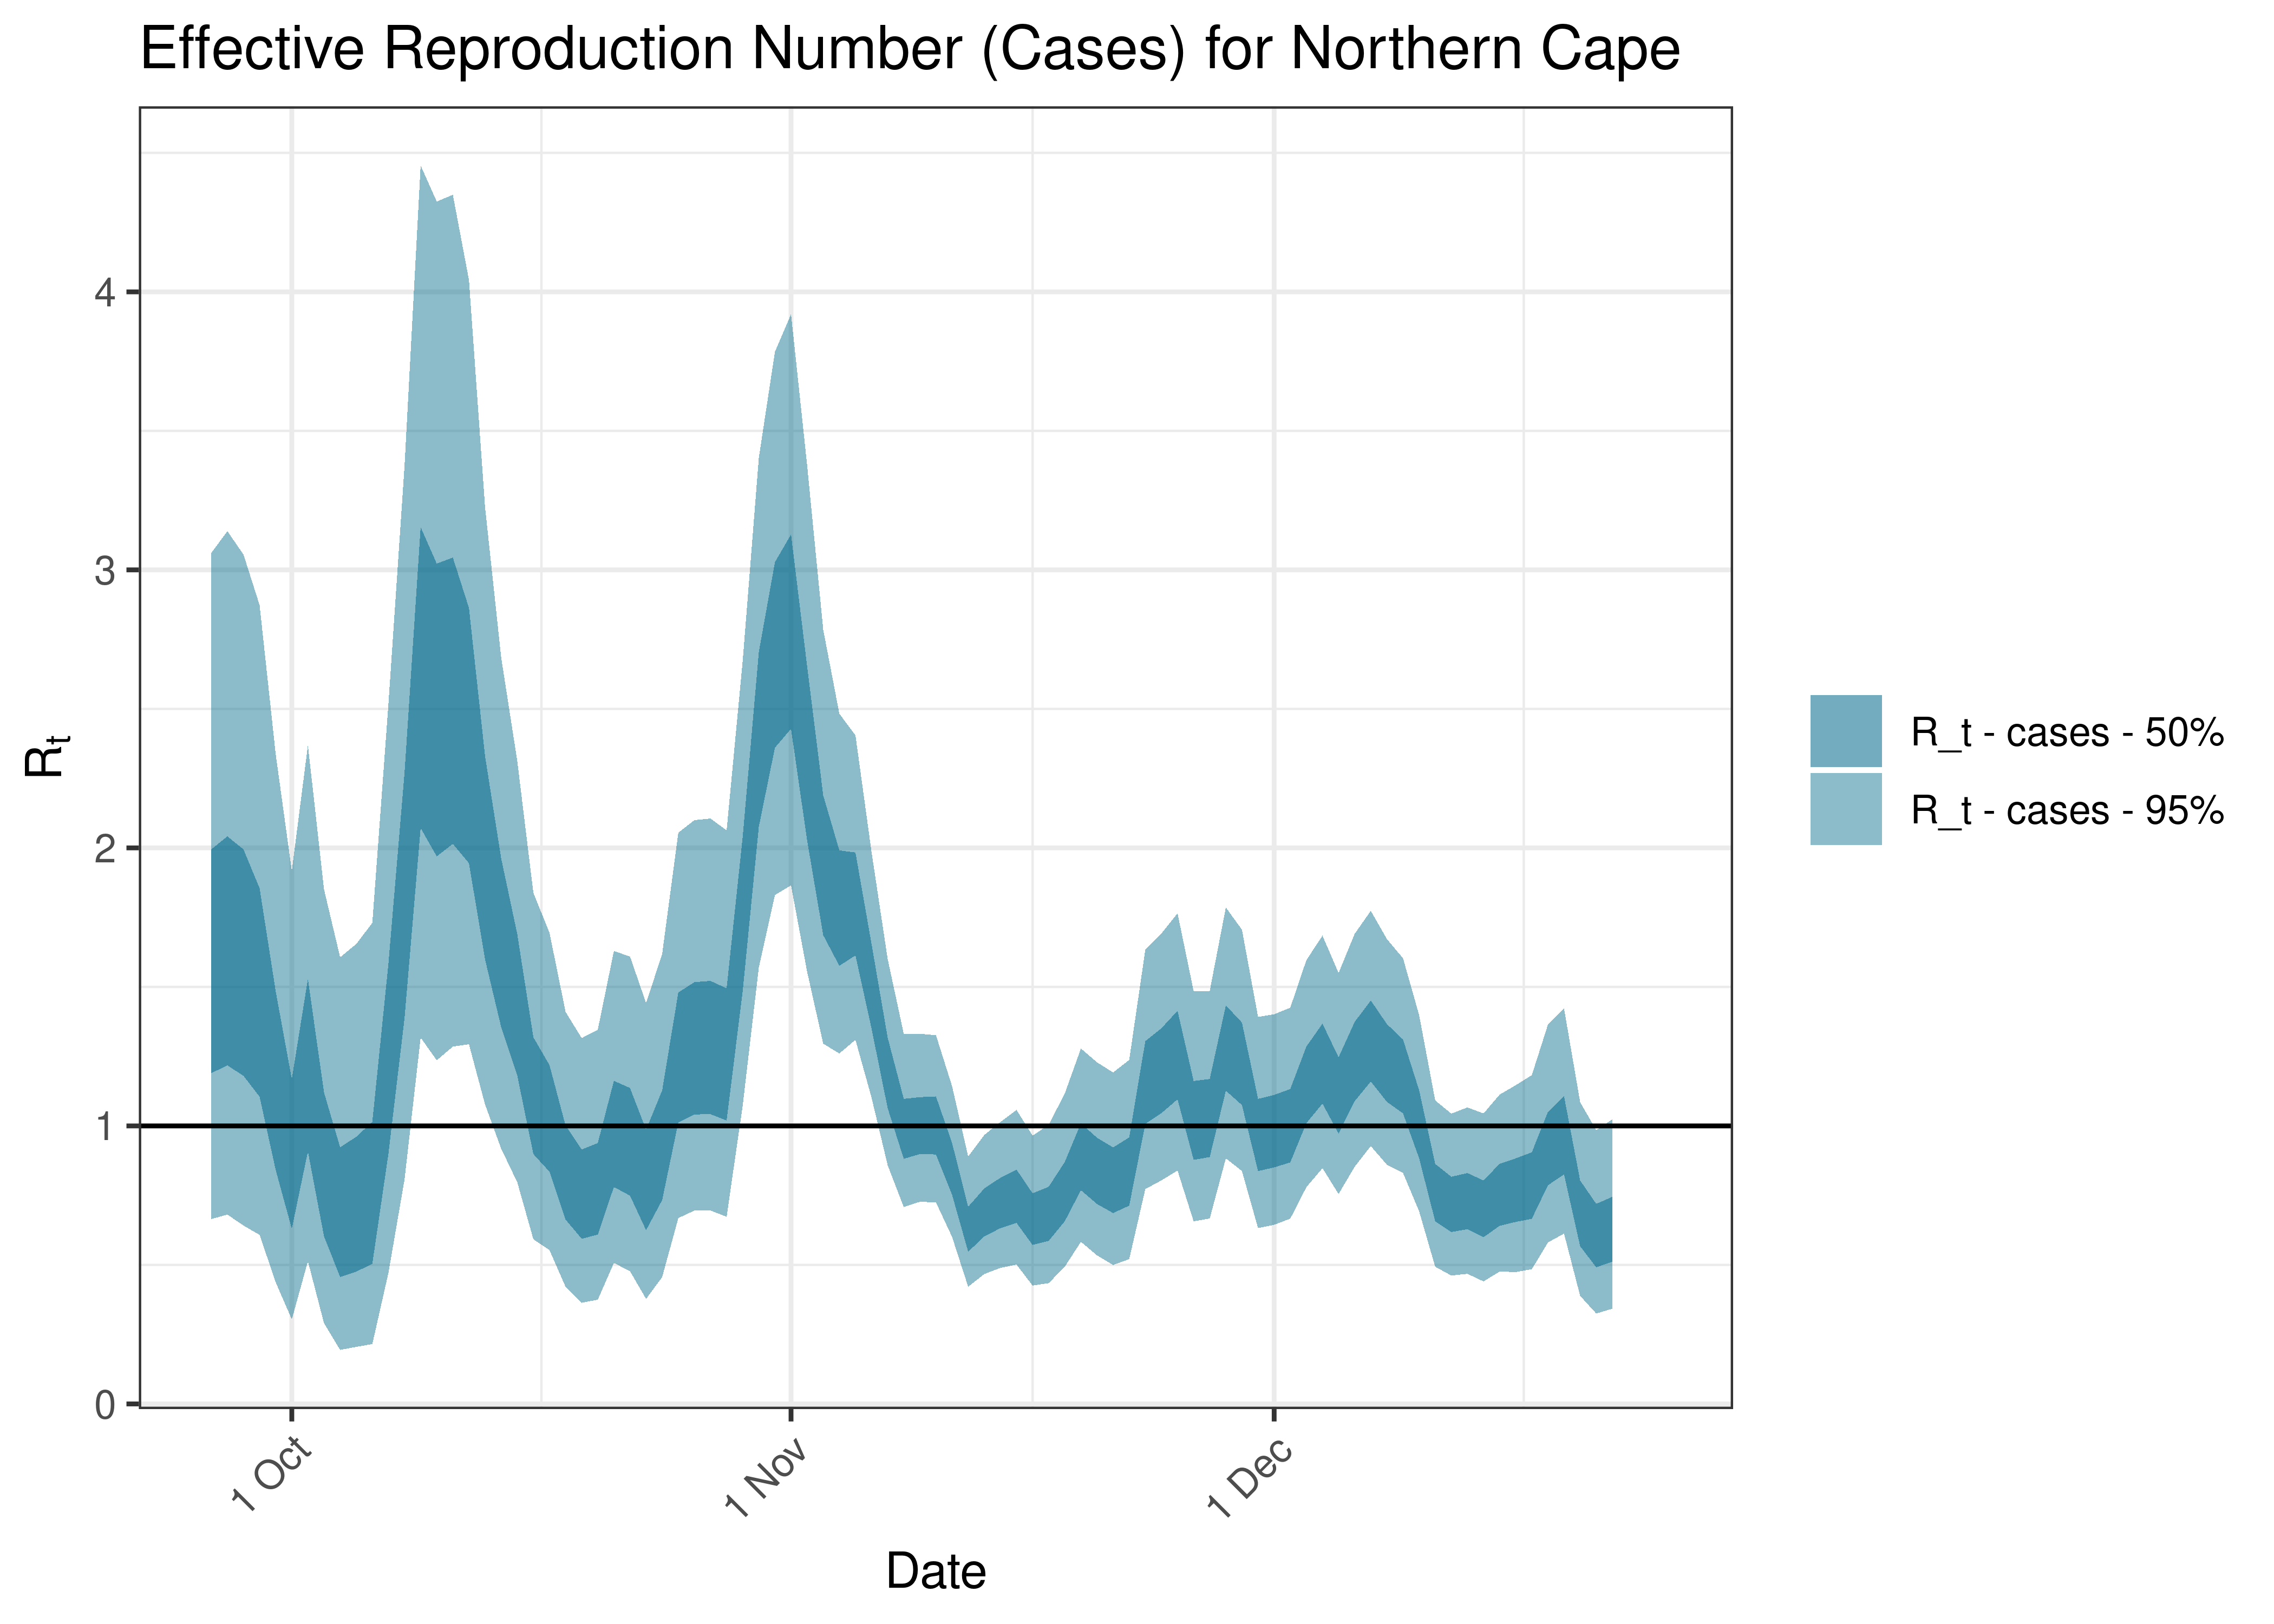 Estimated Effective Reproduction Number Based on Cases for Northern Cape over last 90 days